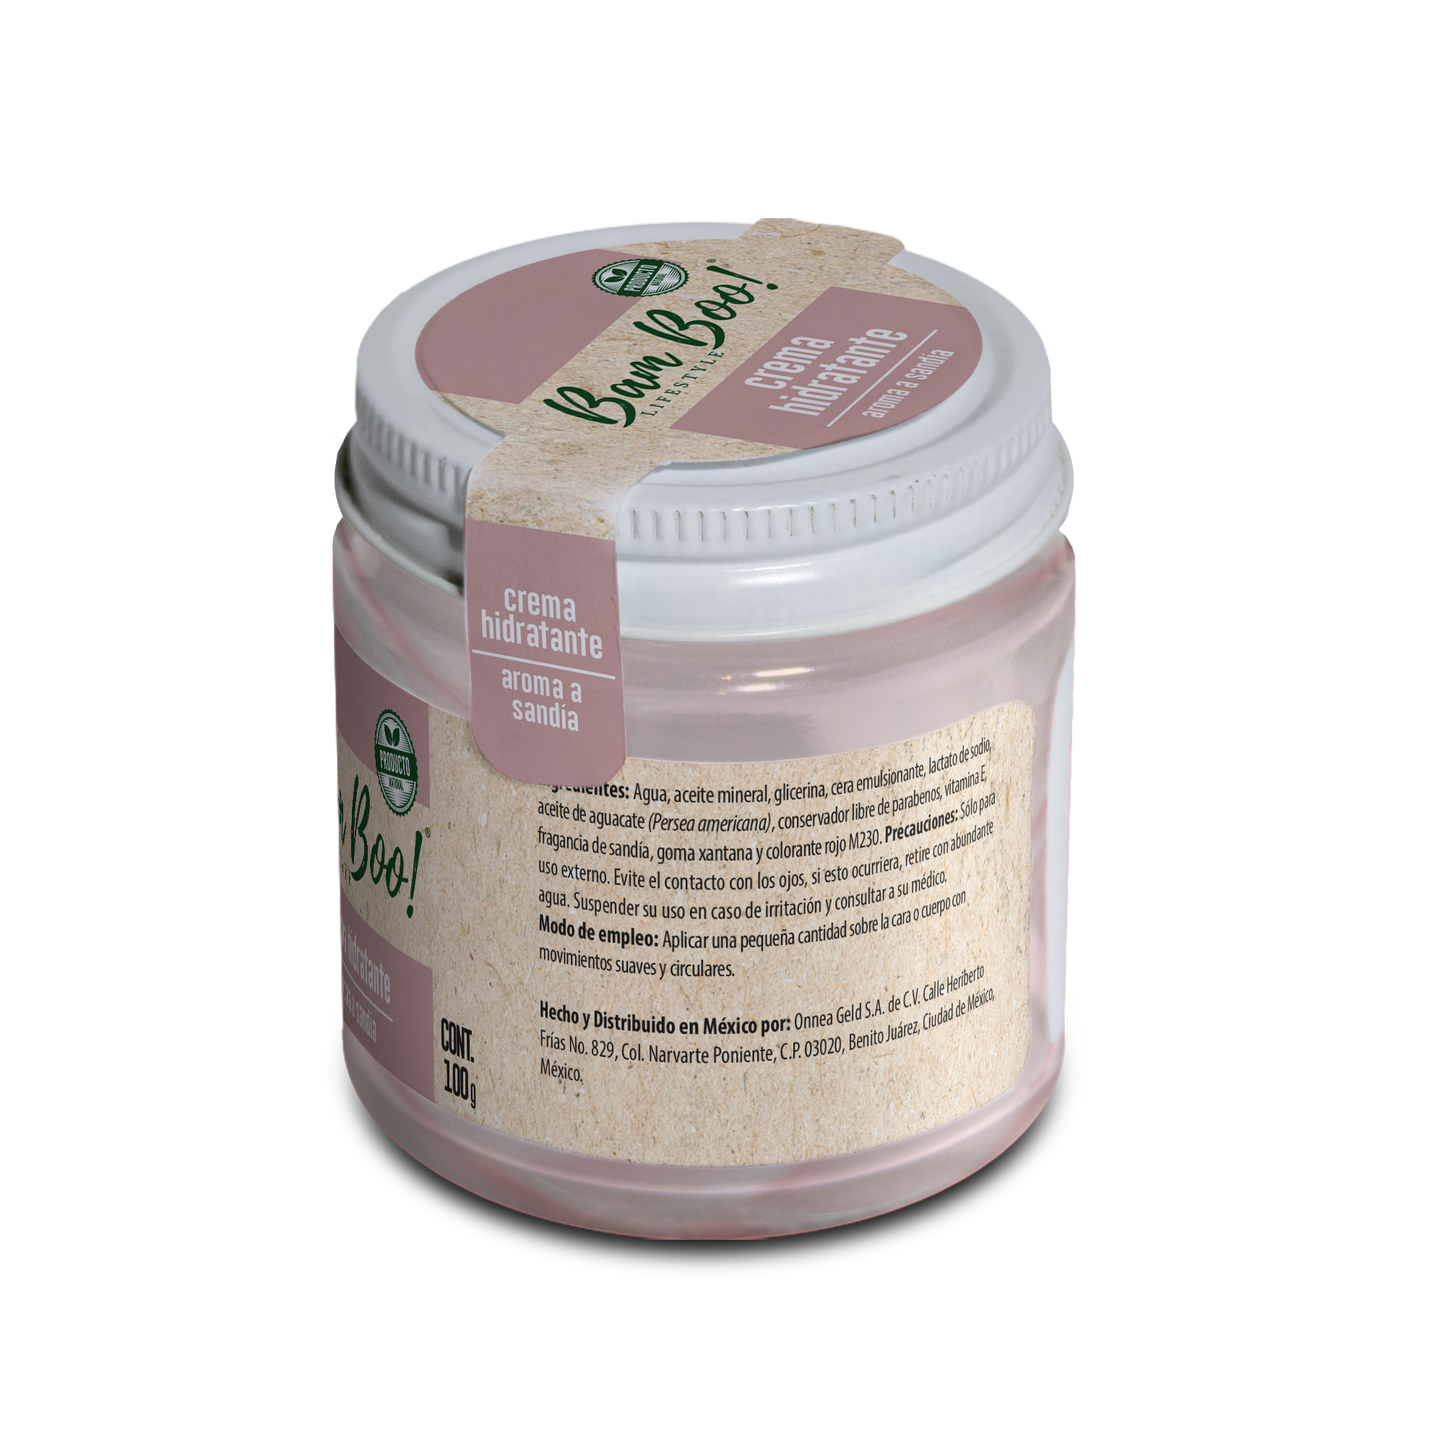 Watermelon Moisturizing Cream for Face and Body 100 g Bam Boo! Lifestyle